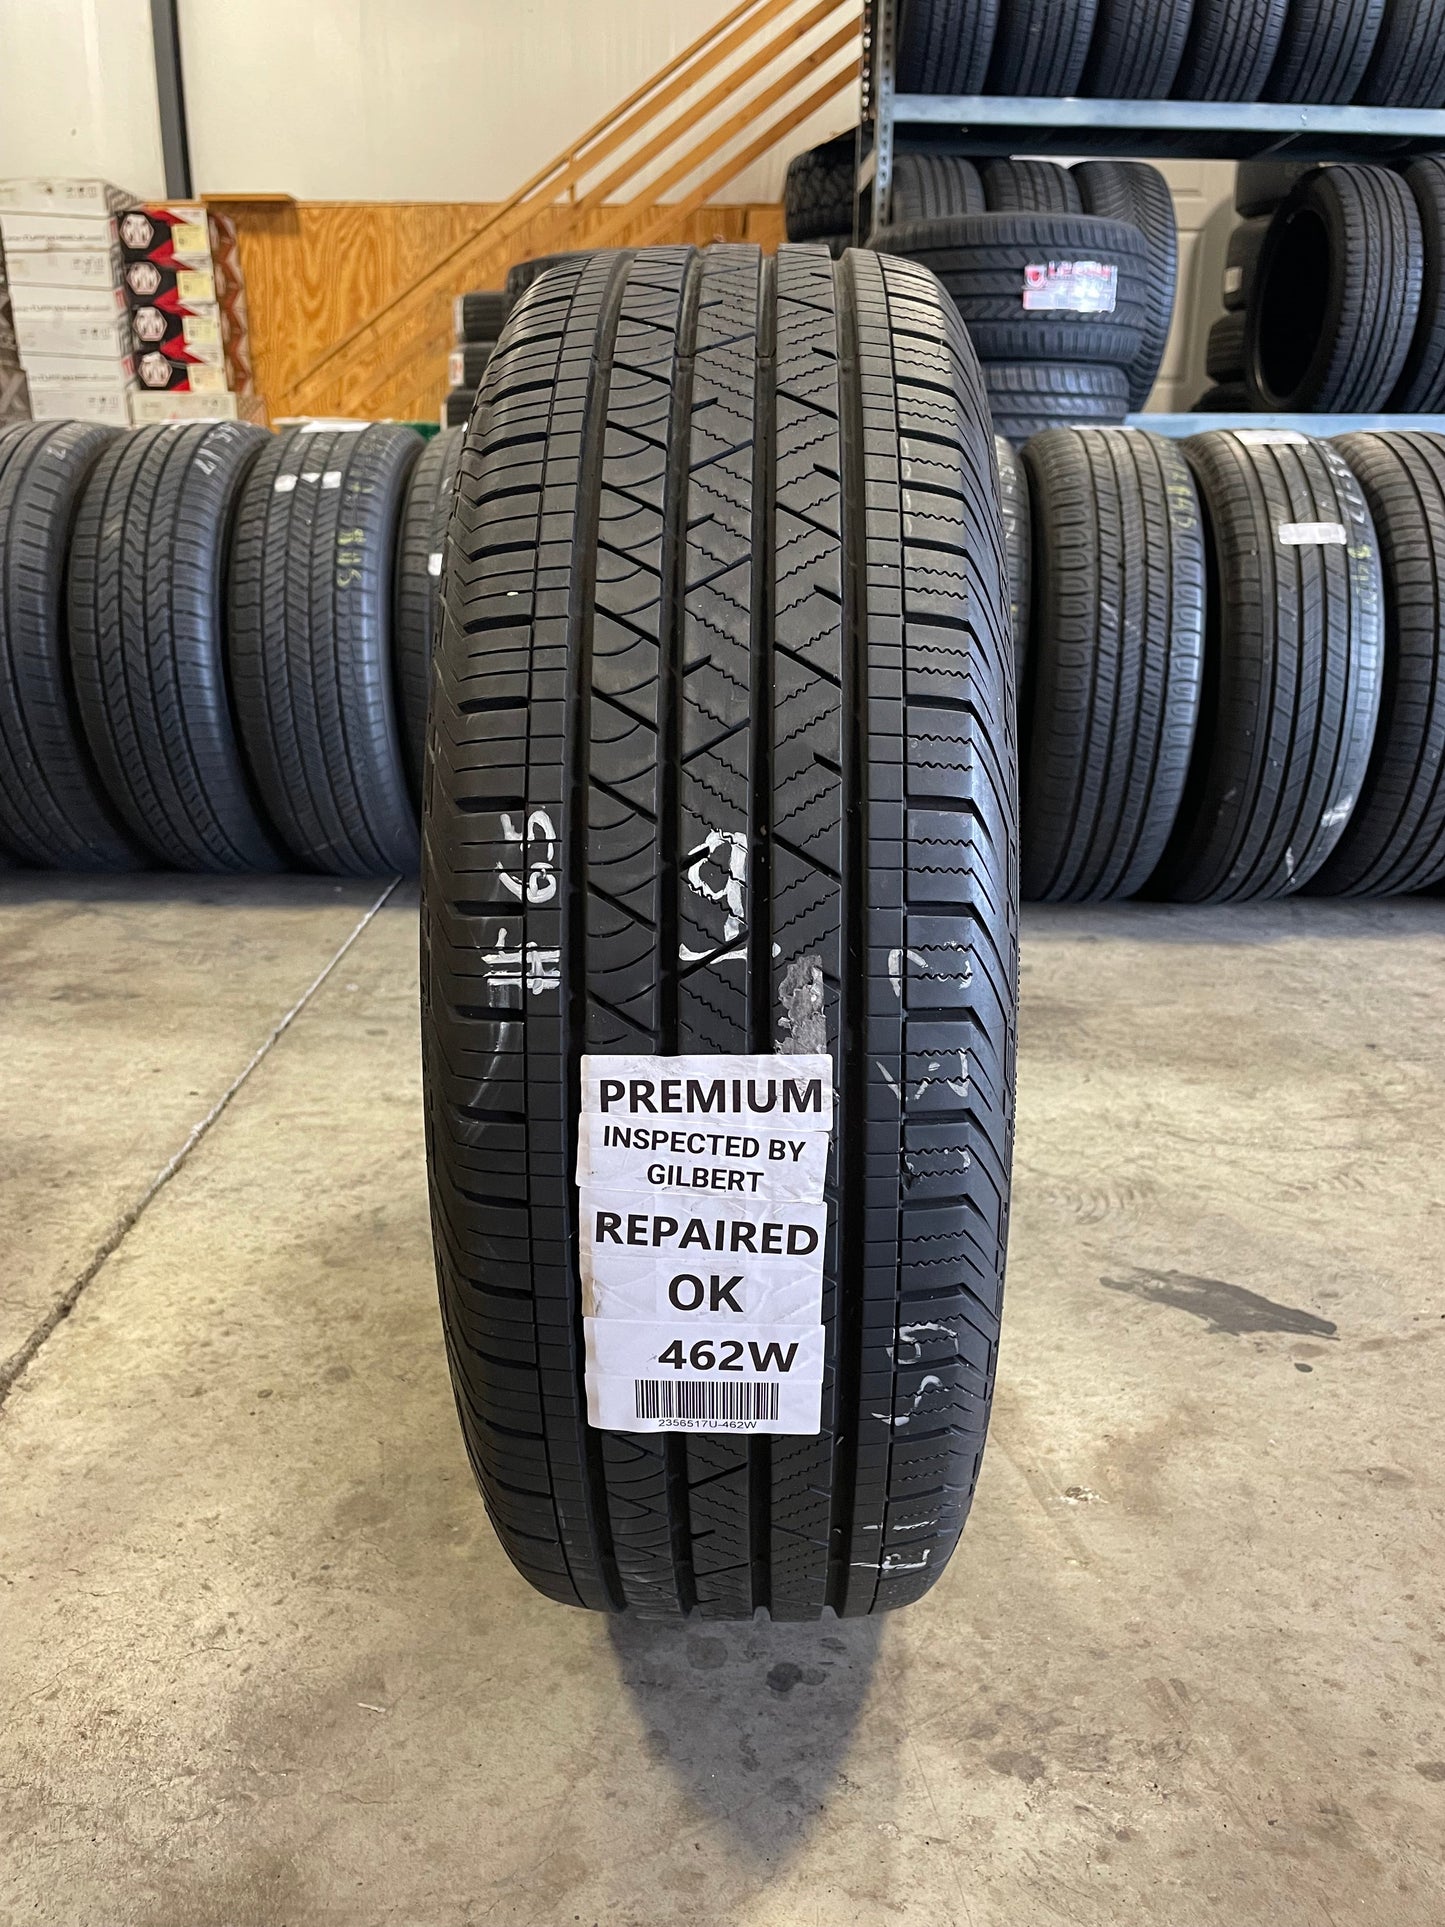 SINGLE 235/65R17 Continental Crosscontact LX Sport 104 H SL - Premium Used Tires